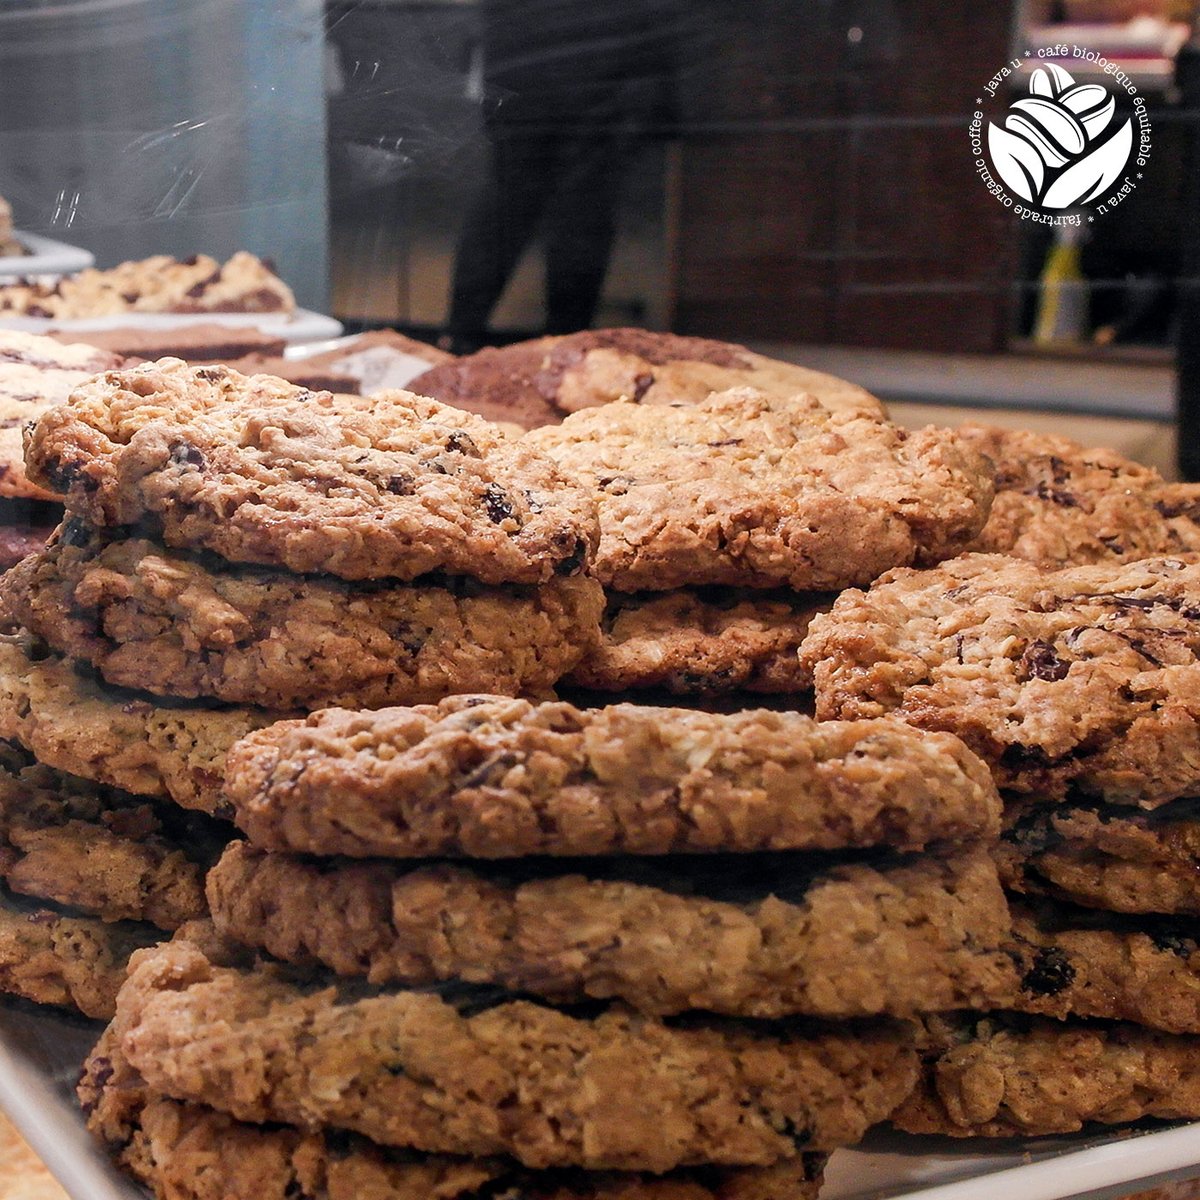 The tastiest snack to go with your coffee; cookies! 😋🍪

La meilleure collation pour accompagner votre café: les biscuits! 😋🍪

#javau #fairtradeorganic #montreal #coffee #cafe #mtlcafe #fresh #coffeelover #coffeeshop #coffeehouse #food #foodie #cookies #snack